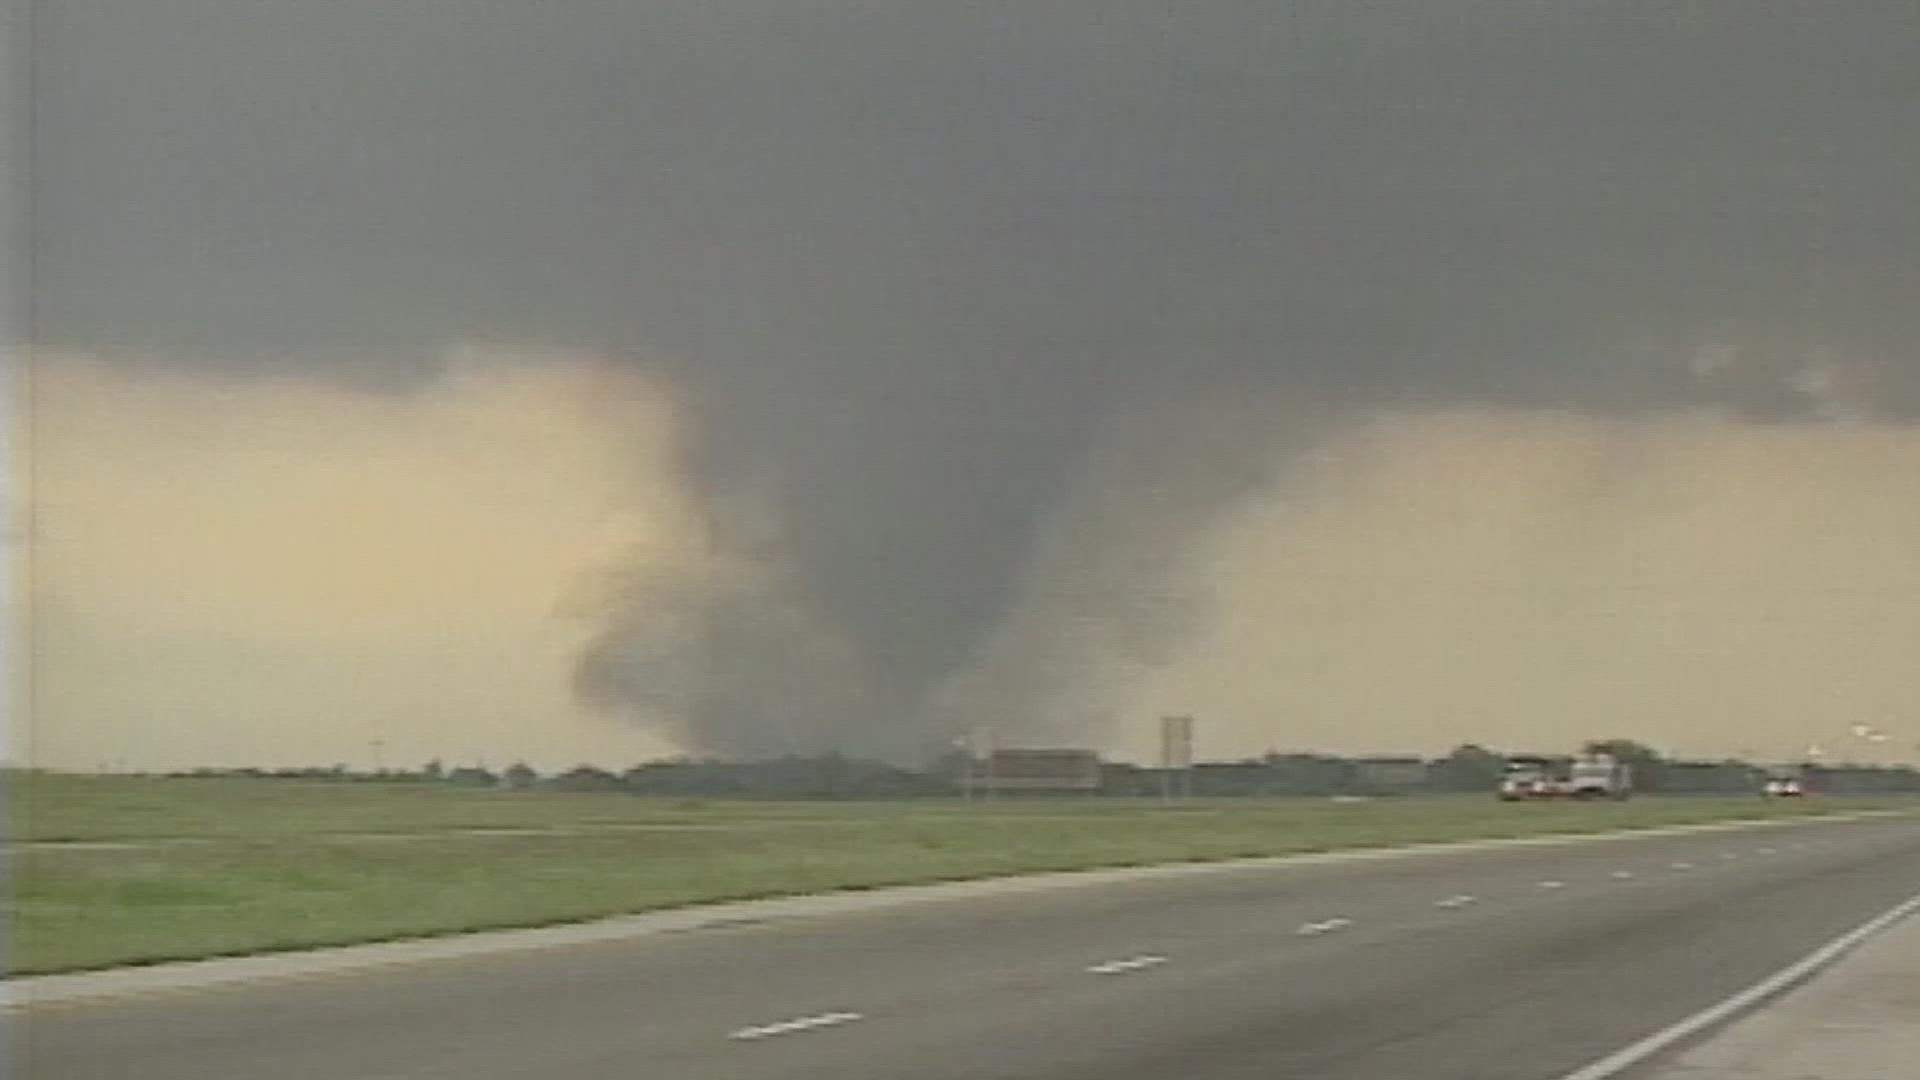 A tornado as strong as the one that hit Jarrell hasn't been seen in Texas since. KVUE Meteorologist Hunter Williams broke down what happened on that day back in '97.